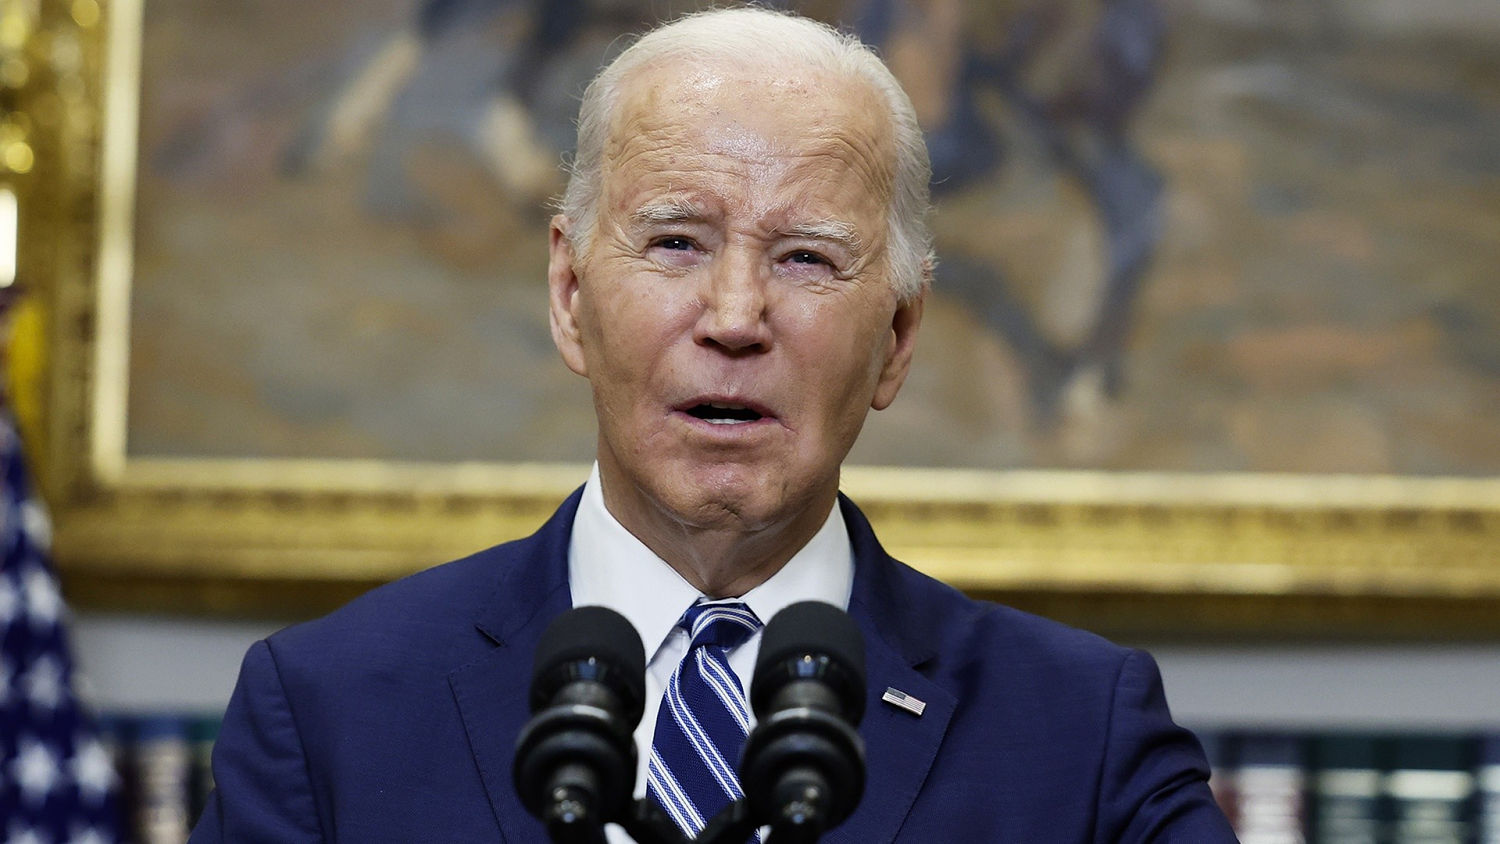 Biden administration announces 500 sanctions on Russia after Navalny's
death